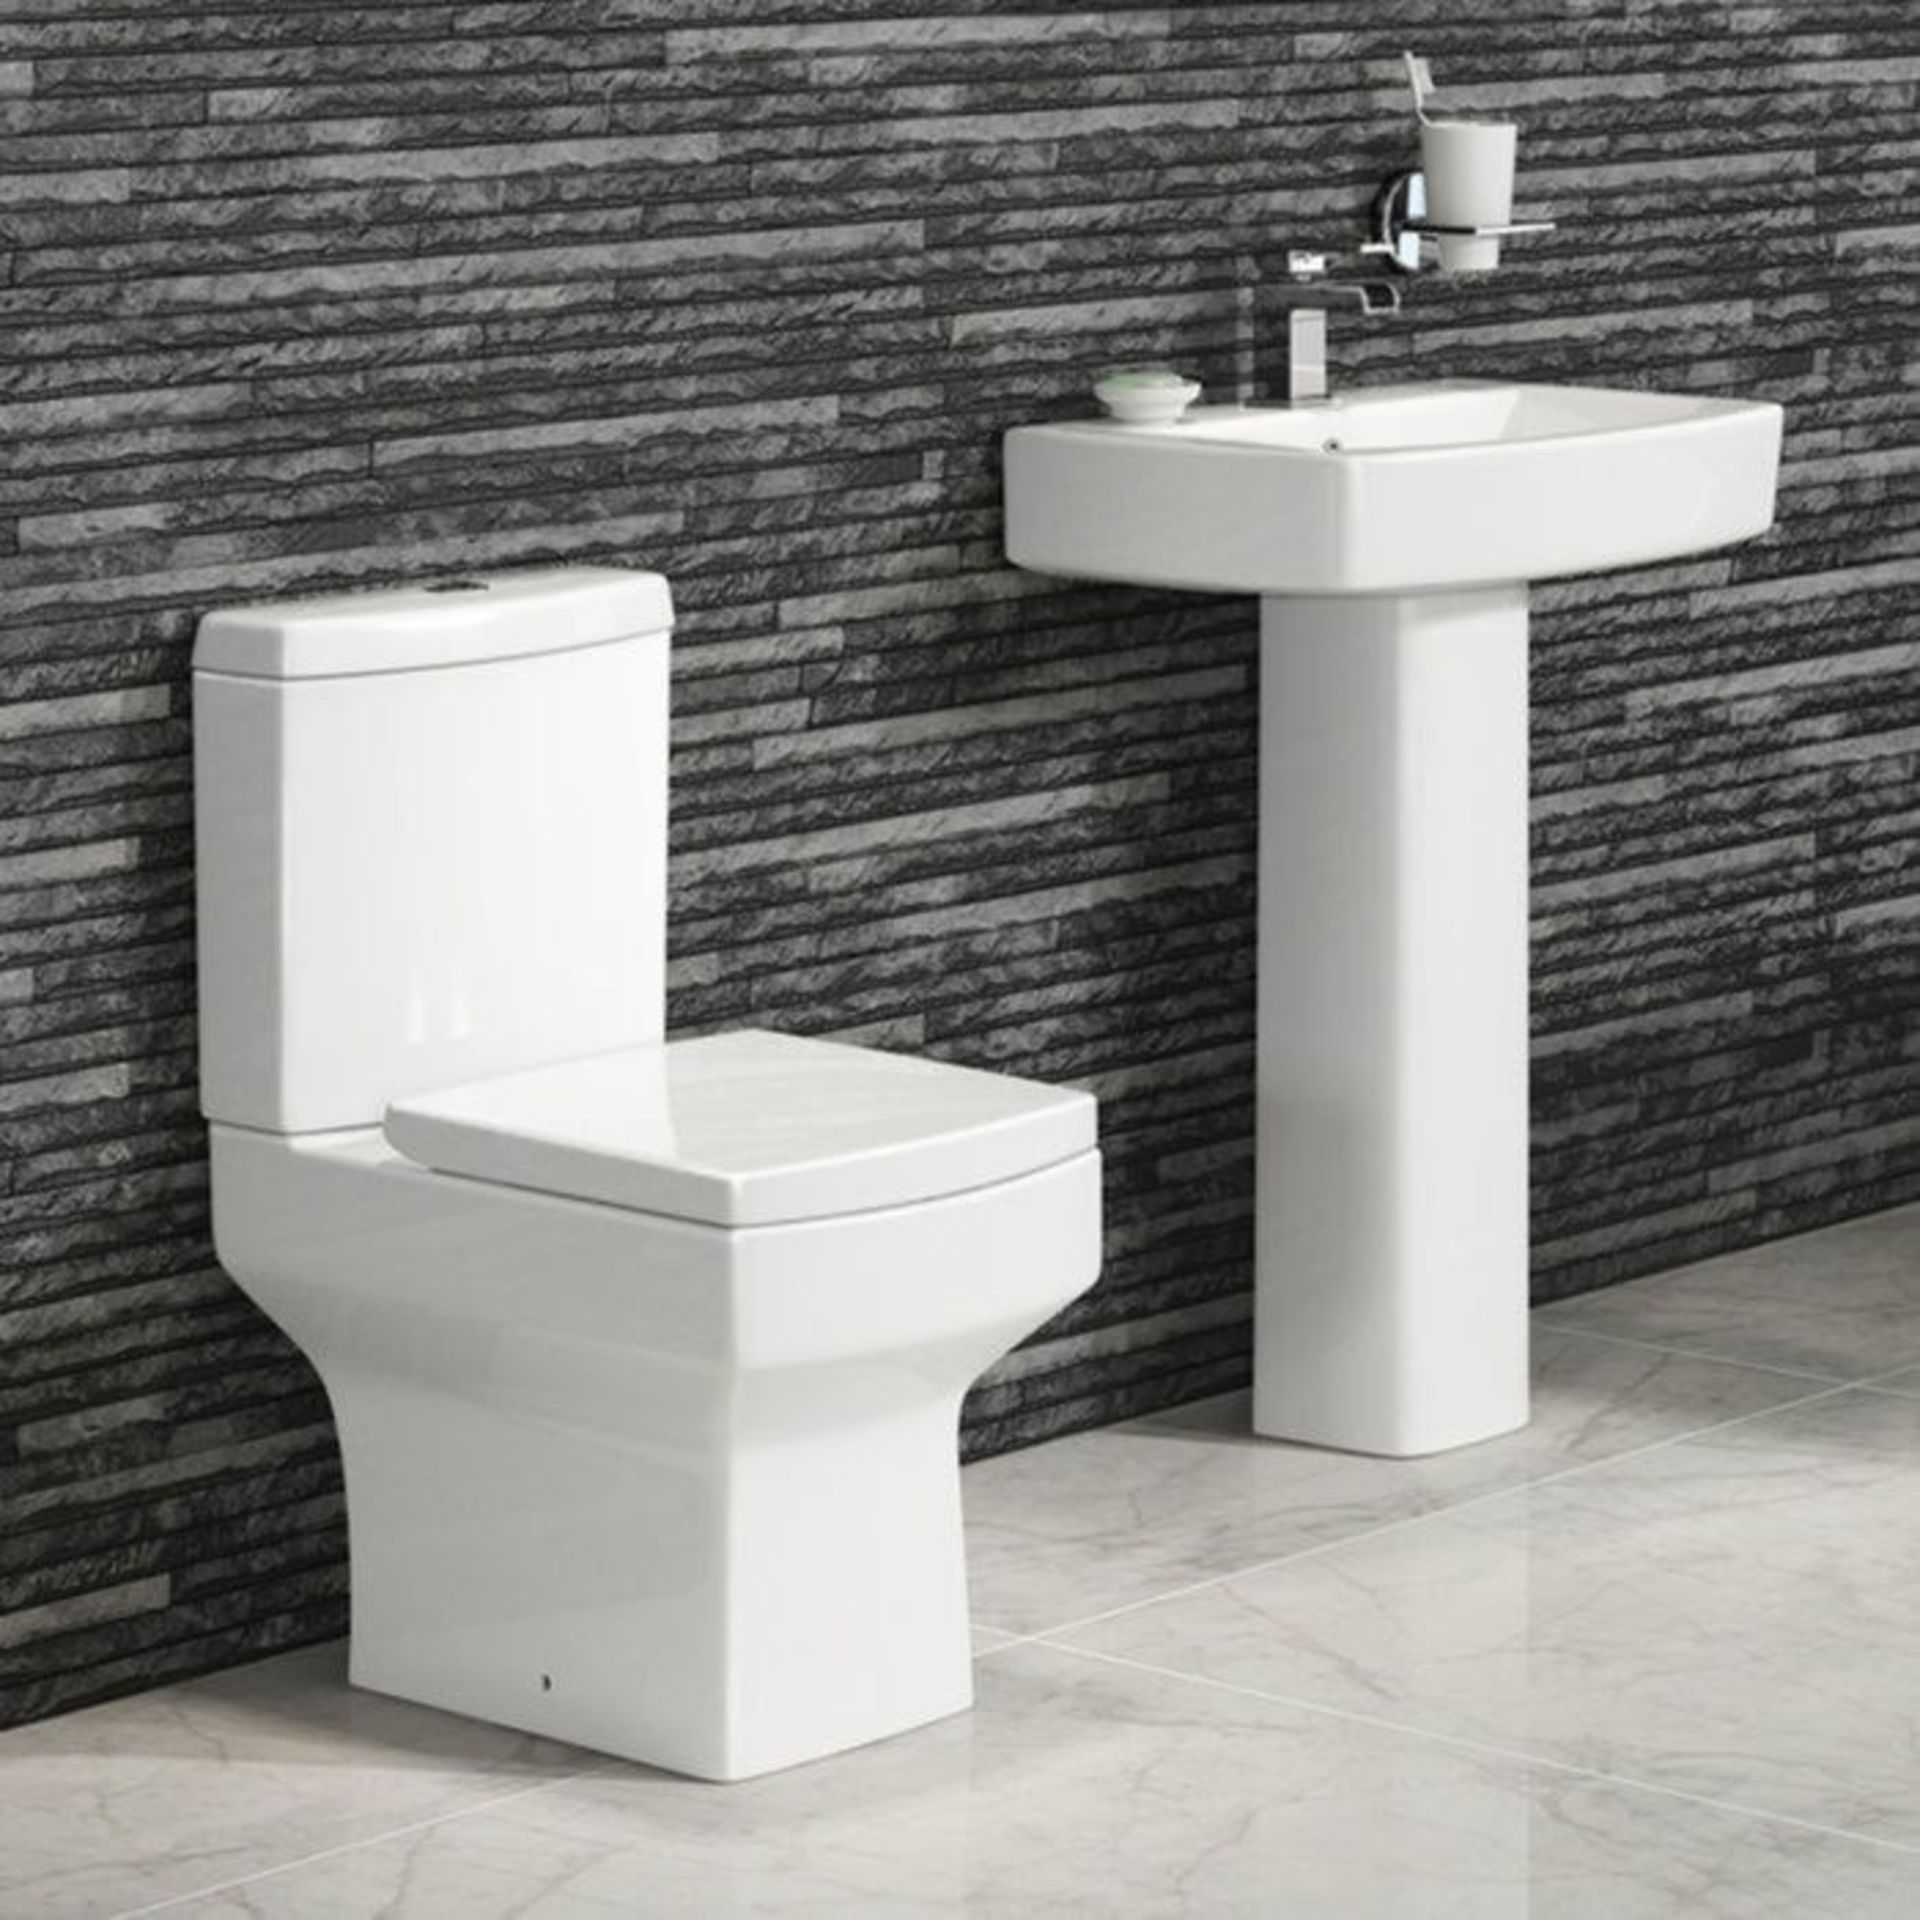 (AA111) Belfort Close Coupled Toilet & Cistern inc Soft Close Seat Made from White Vitreous Chi... - Image 3 of 3